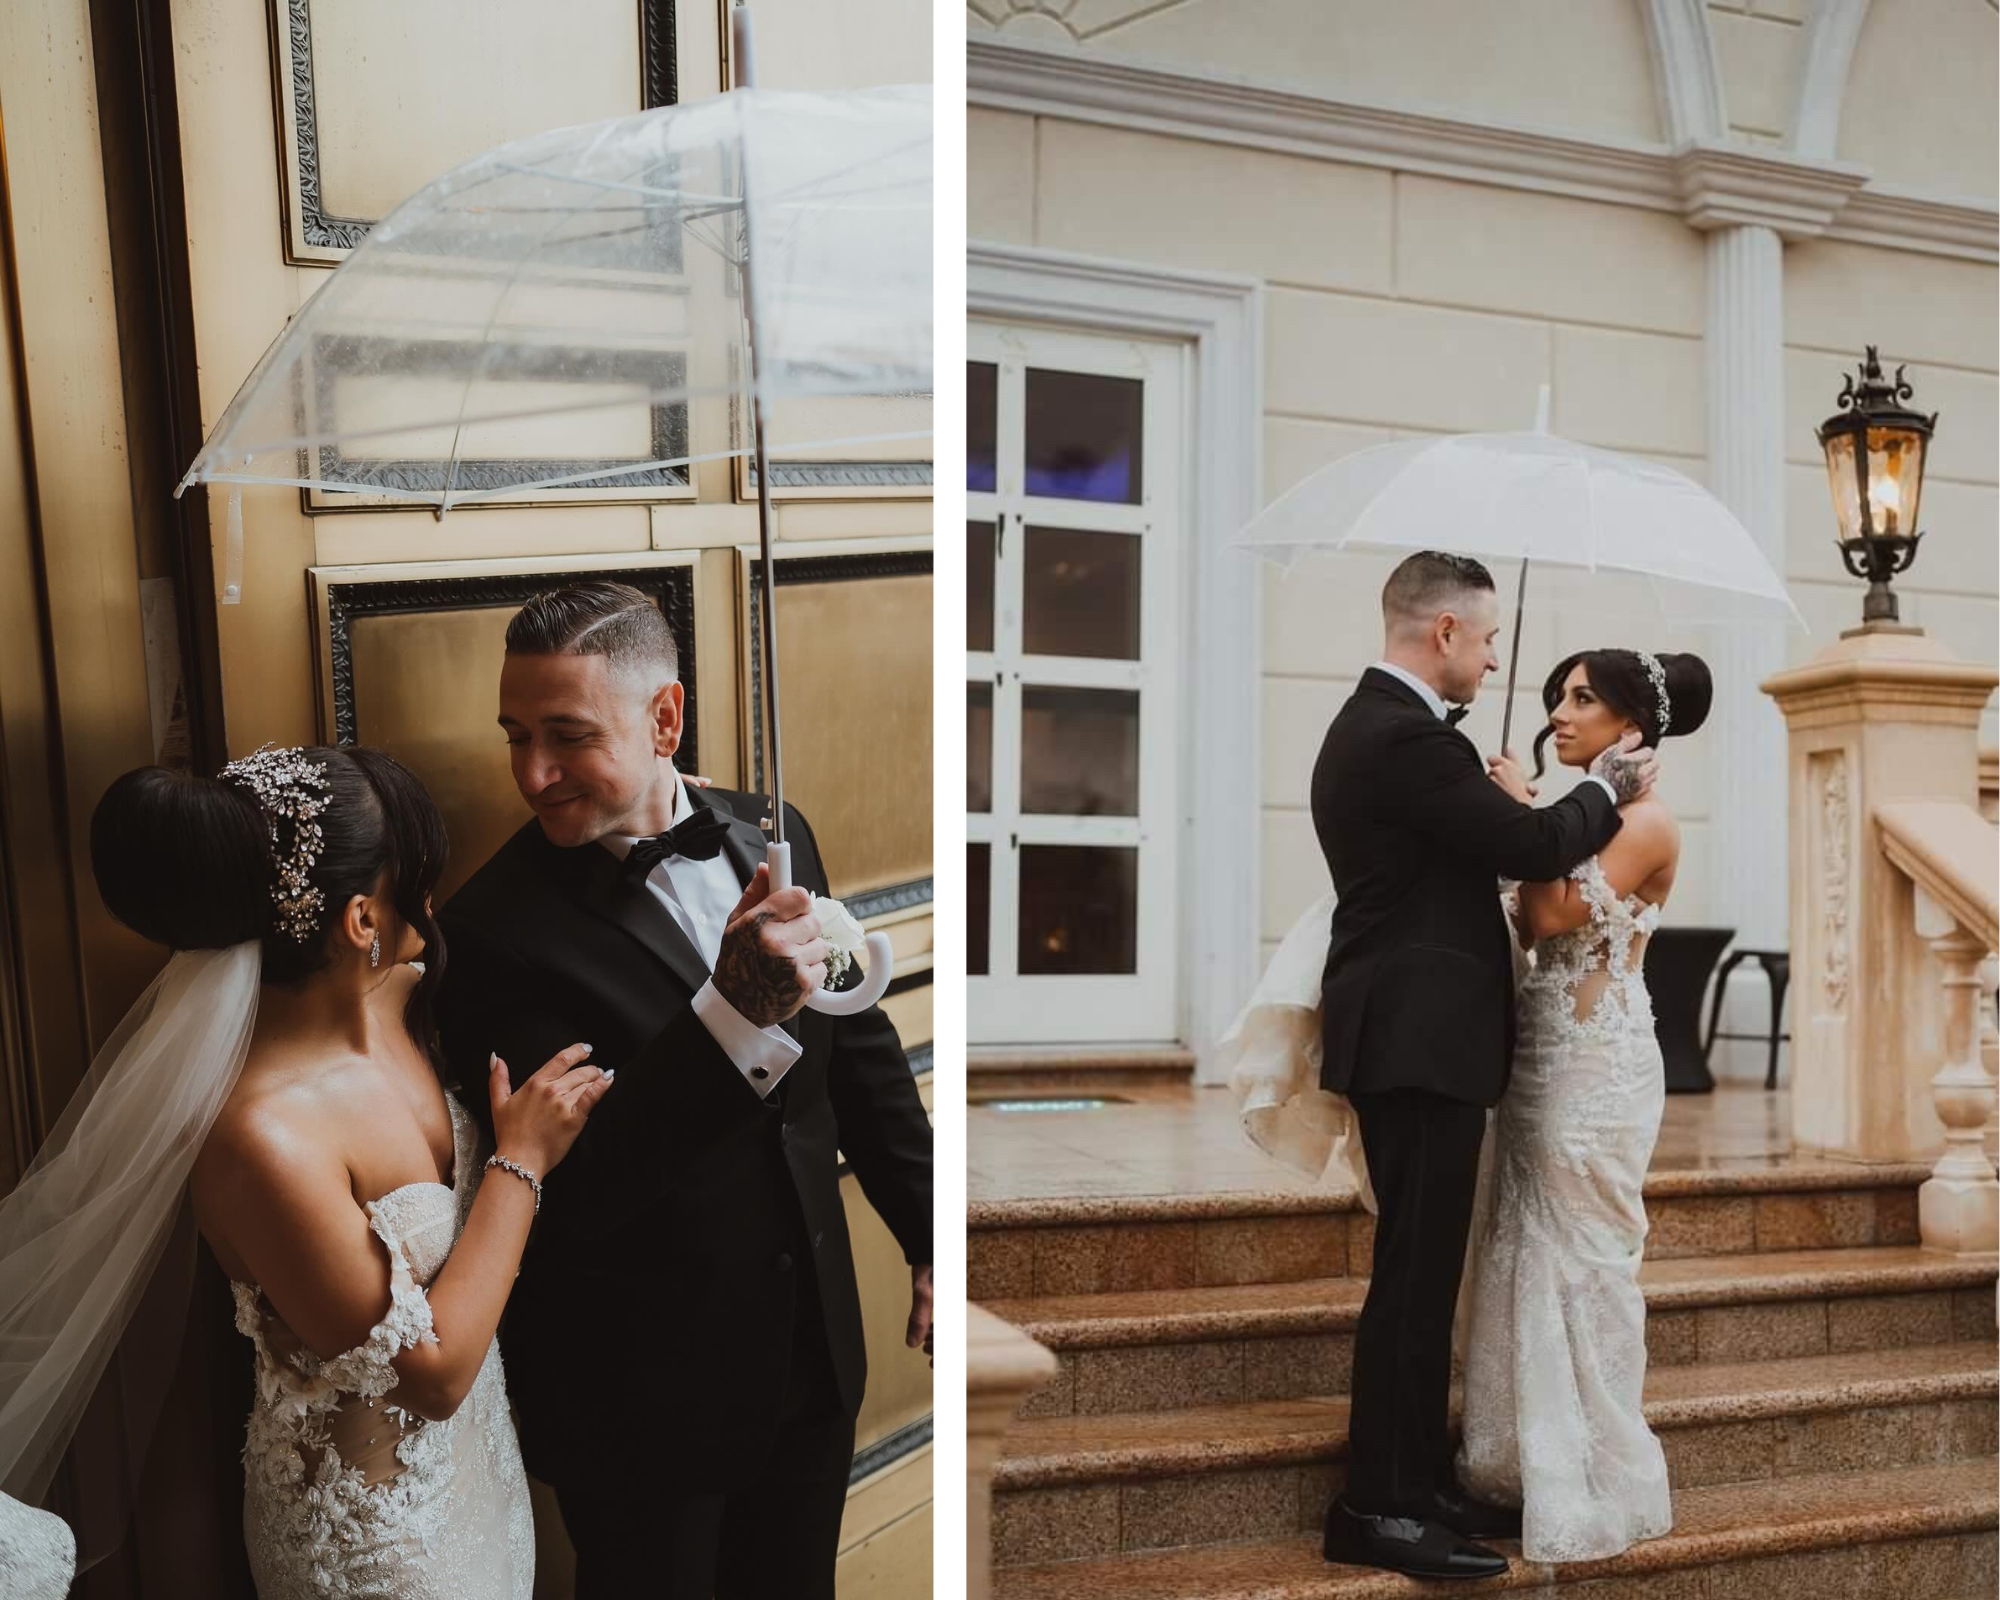 Our bride with her groom in the rain. Lace Berta wedding dress, Swarovski crystal bridal headpiece, embroidered cathedral veil, and earrings.